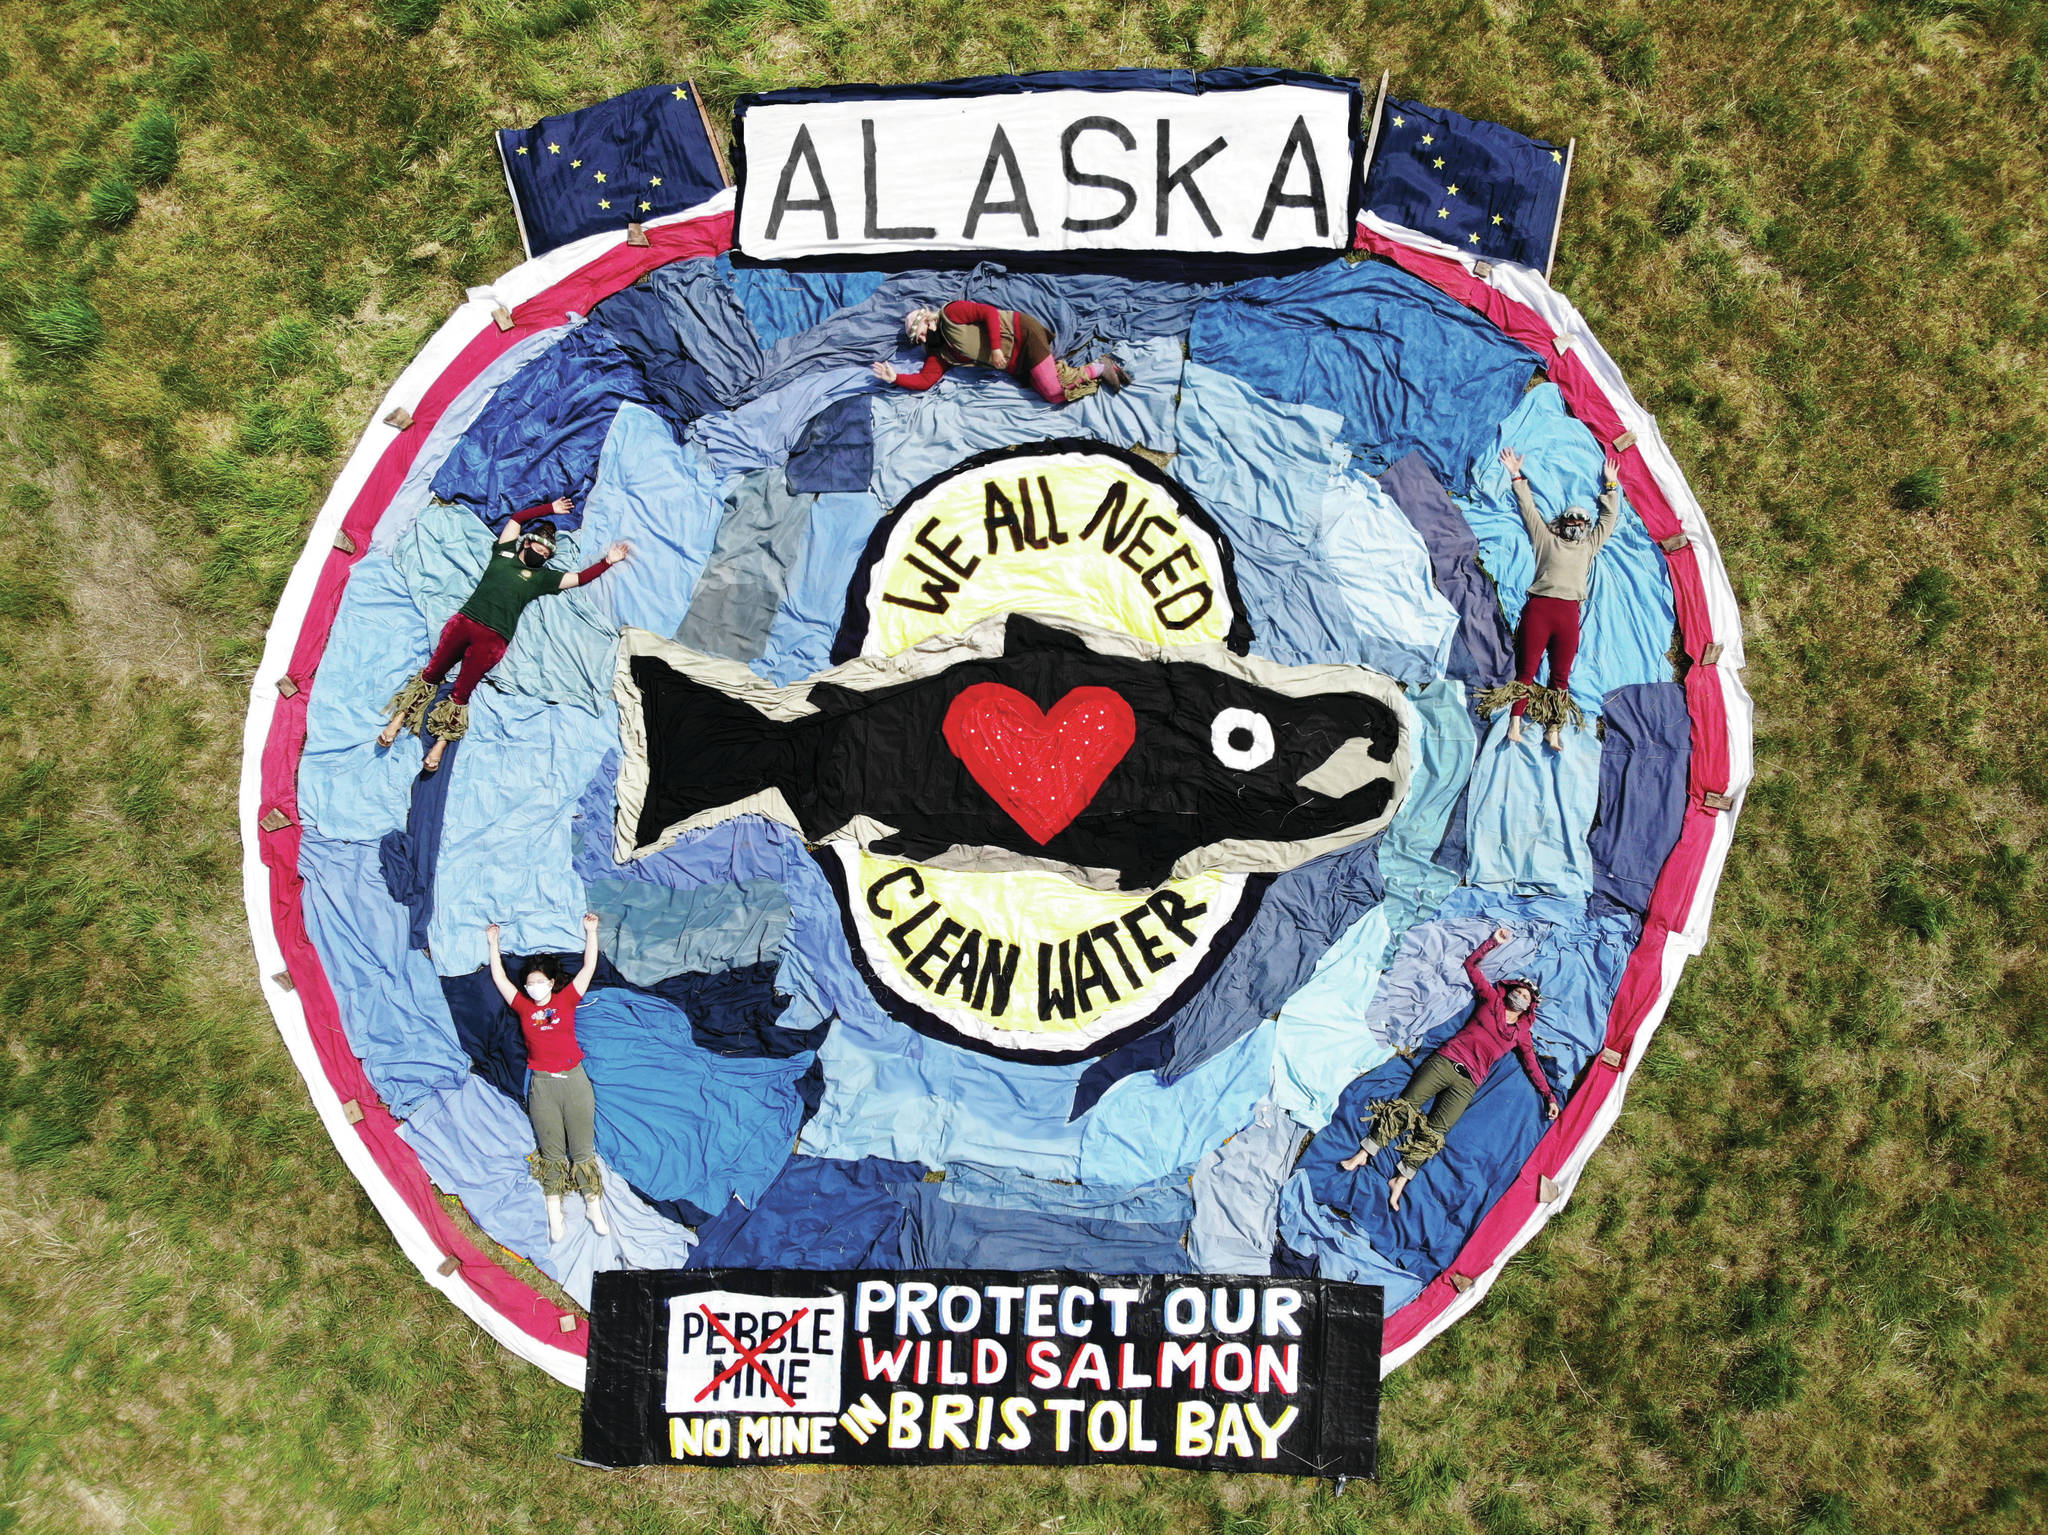 Five artists wearing face masks on Thursday, July 23, 2020, create the annual Salmonfest aerial art in organizing artist Mavis Muller’s field in Homer, Alaska. With used fabric, the group created a ground design “to send a message for the protection of Alaska’s wild salmon, the water they thrive in and the fisheries of Bristol Bay,” said Muller. (Photo by Vernon Ray Pelkey)